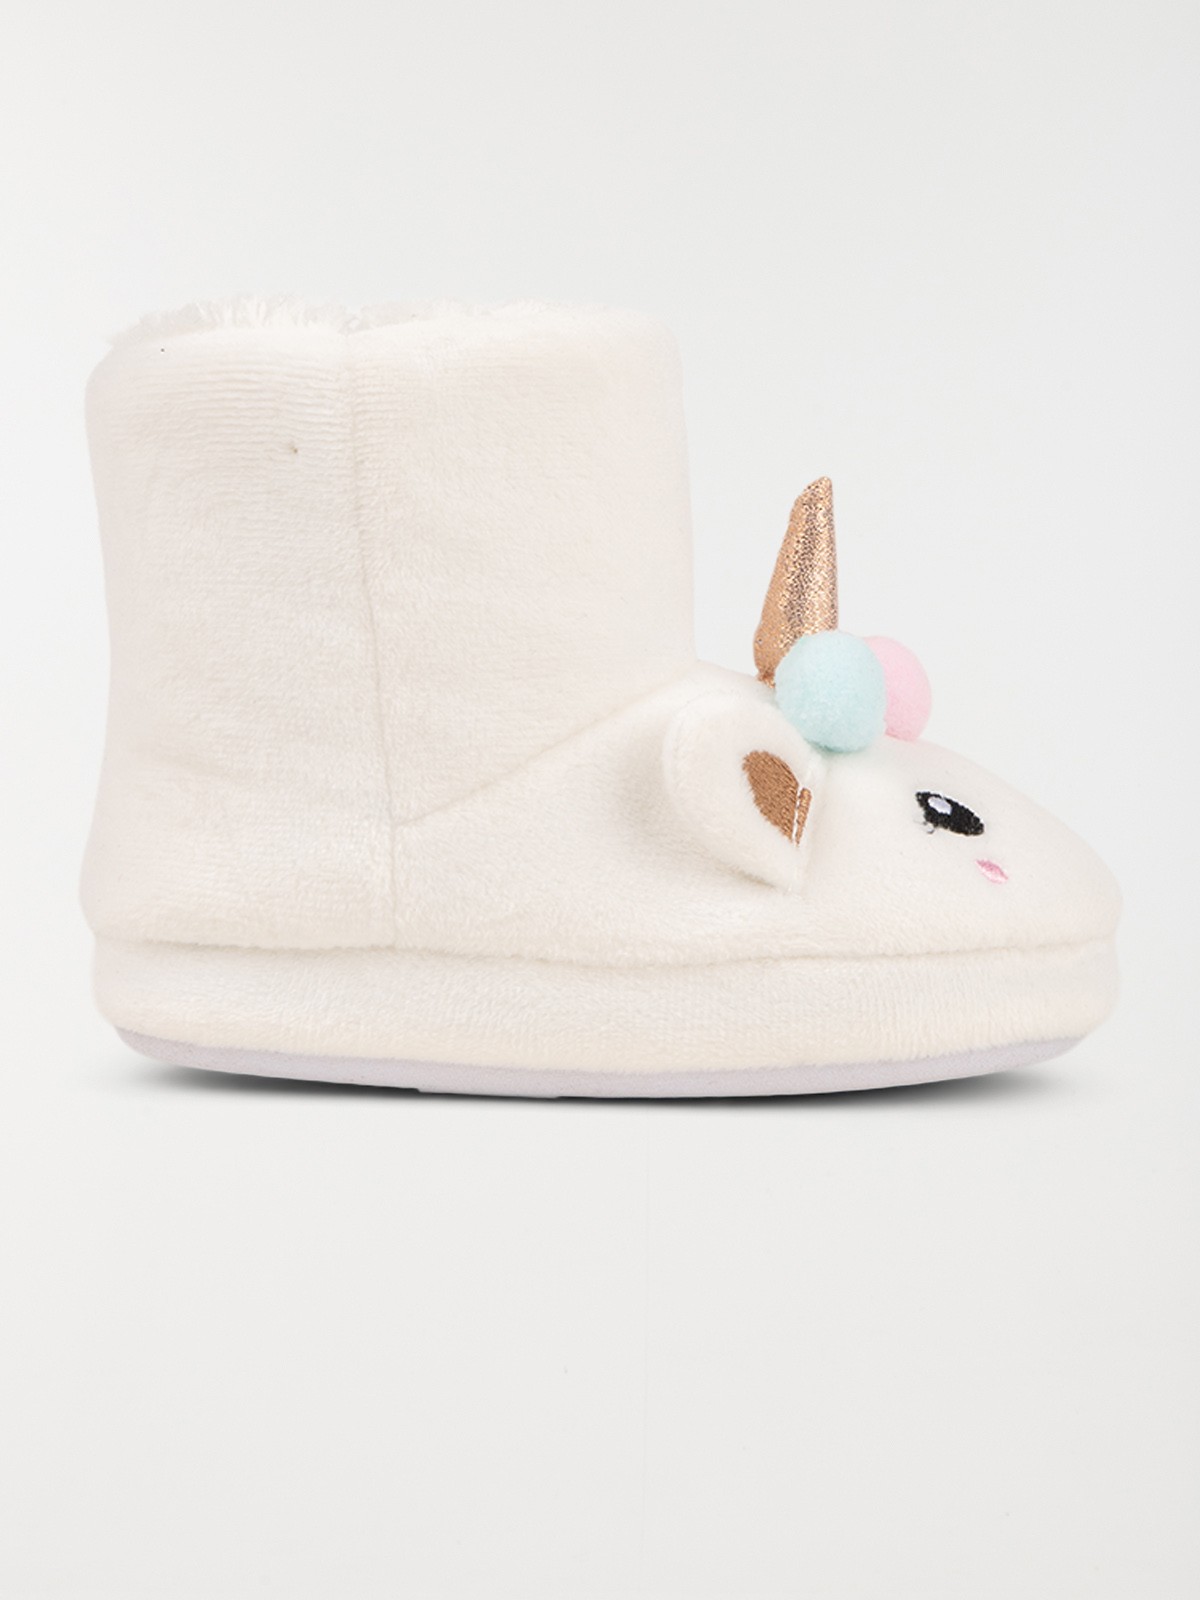 Chaussons Fille pointure 35 - DistriCenter